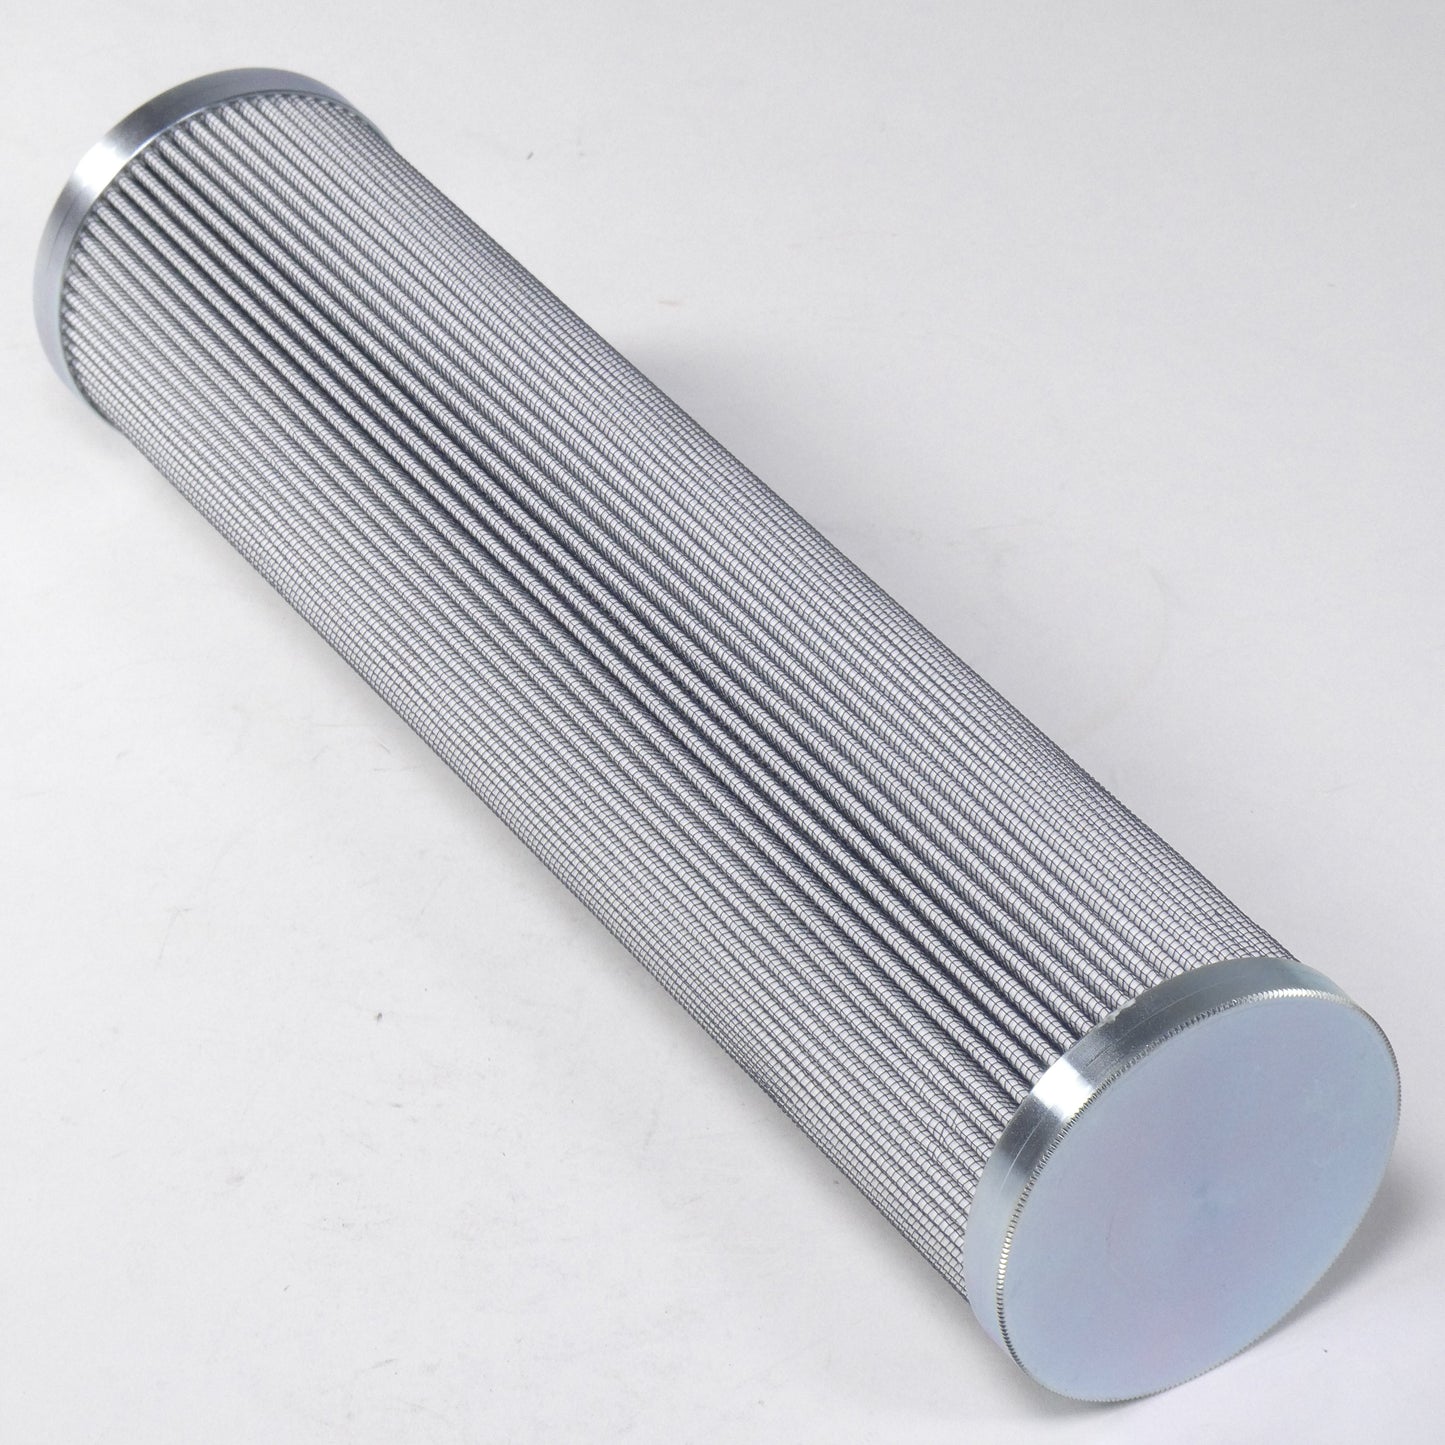 Hydrafil Replacement Filter Element for Hilco 3830-14-063-C